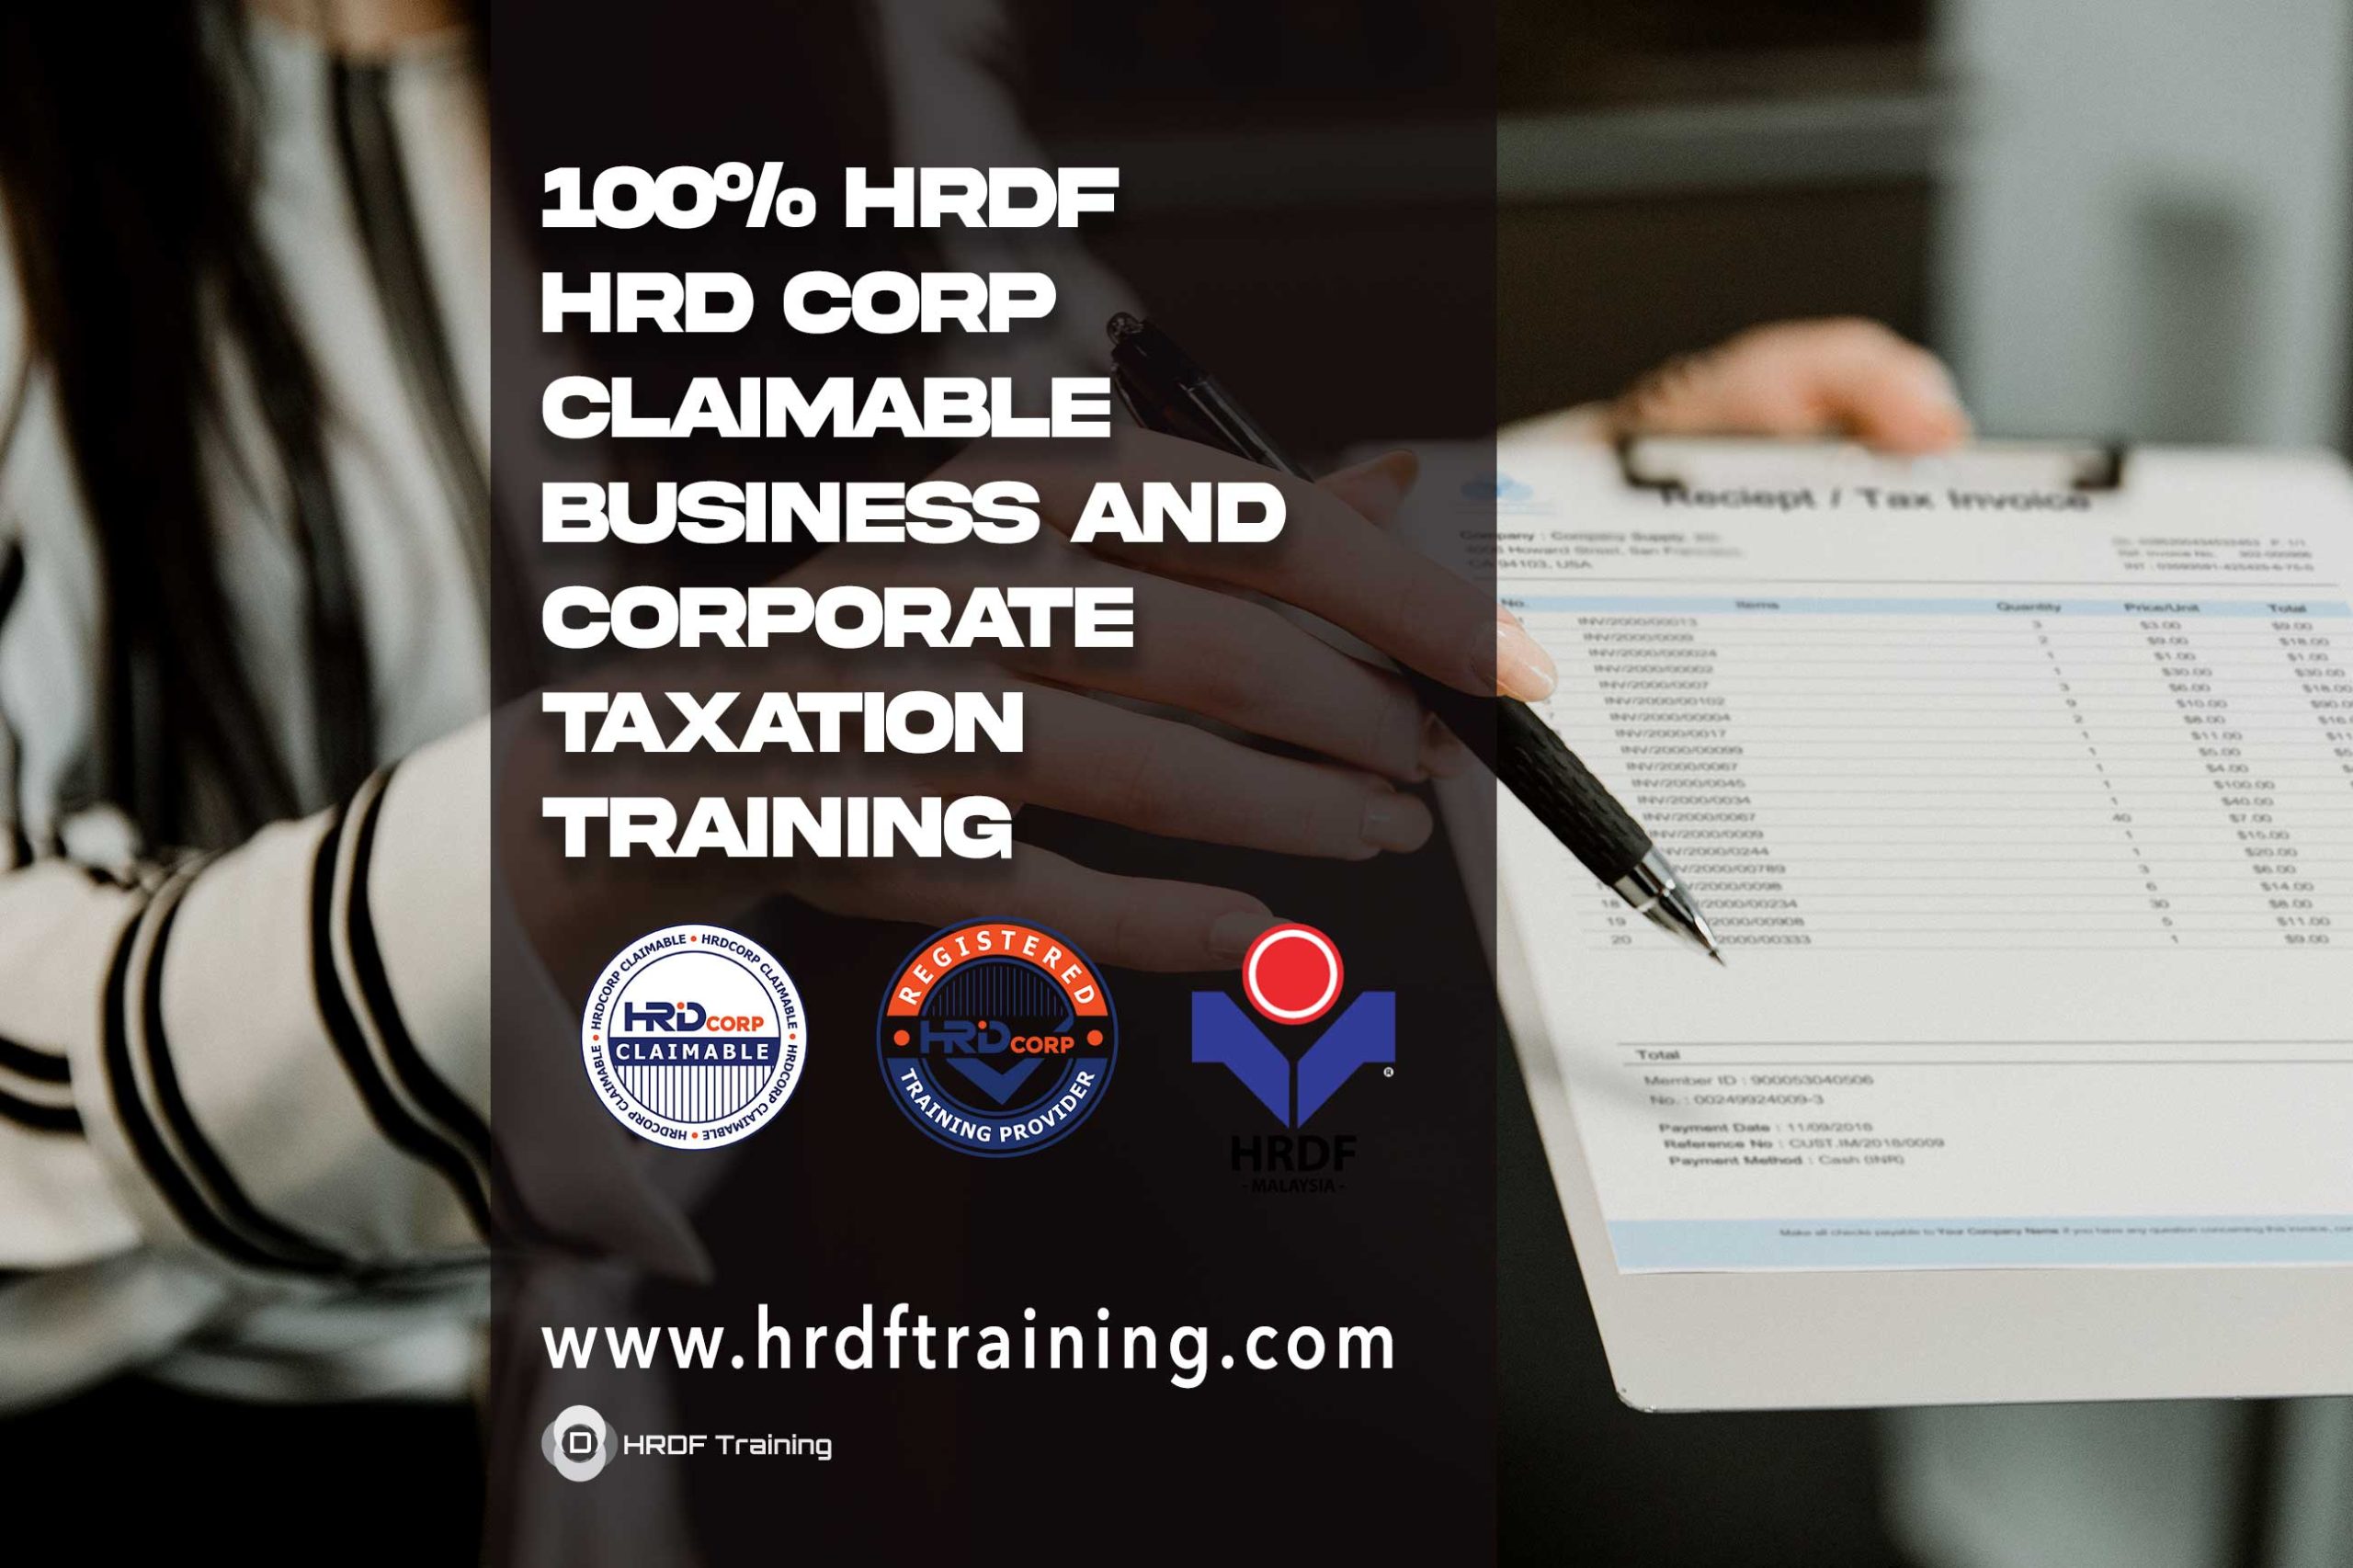 HRDF-HRD-Corp-Claimable-Business-and-Corporate-Taxation-Training